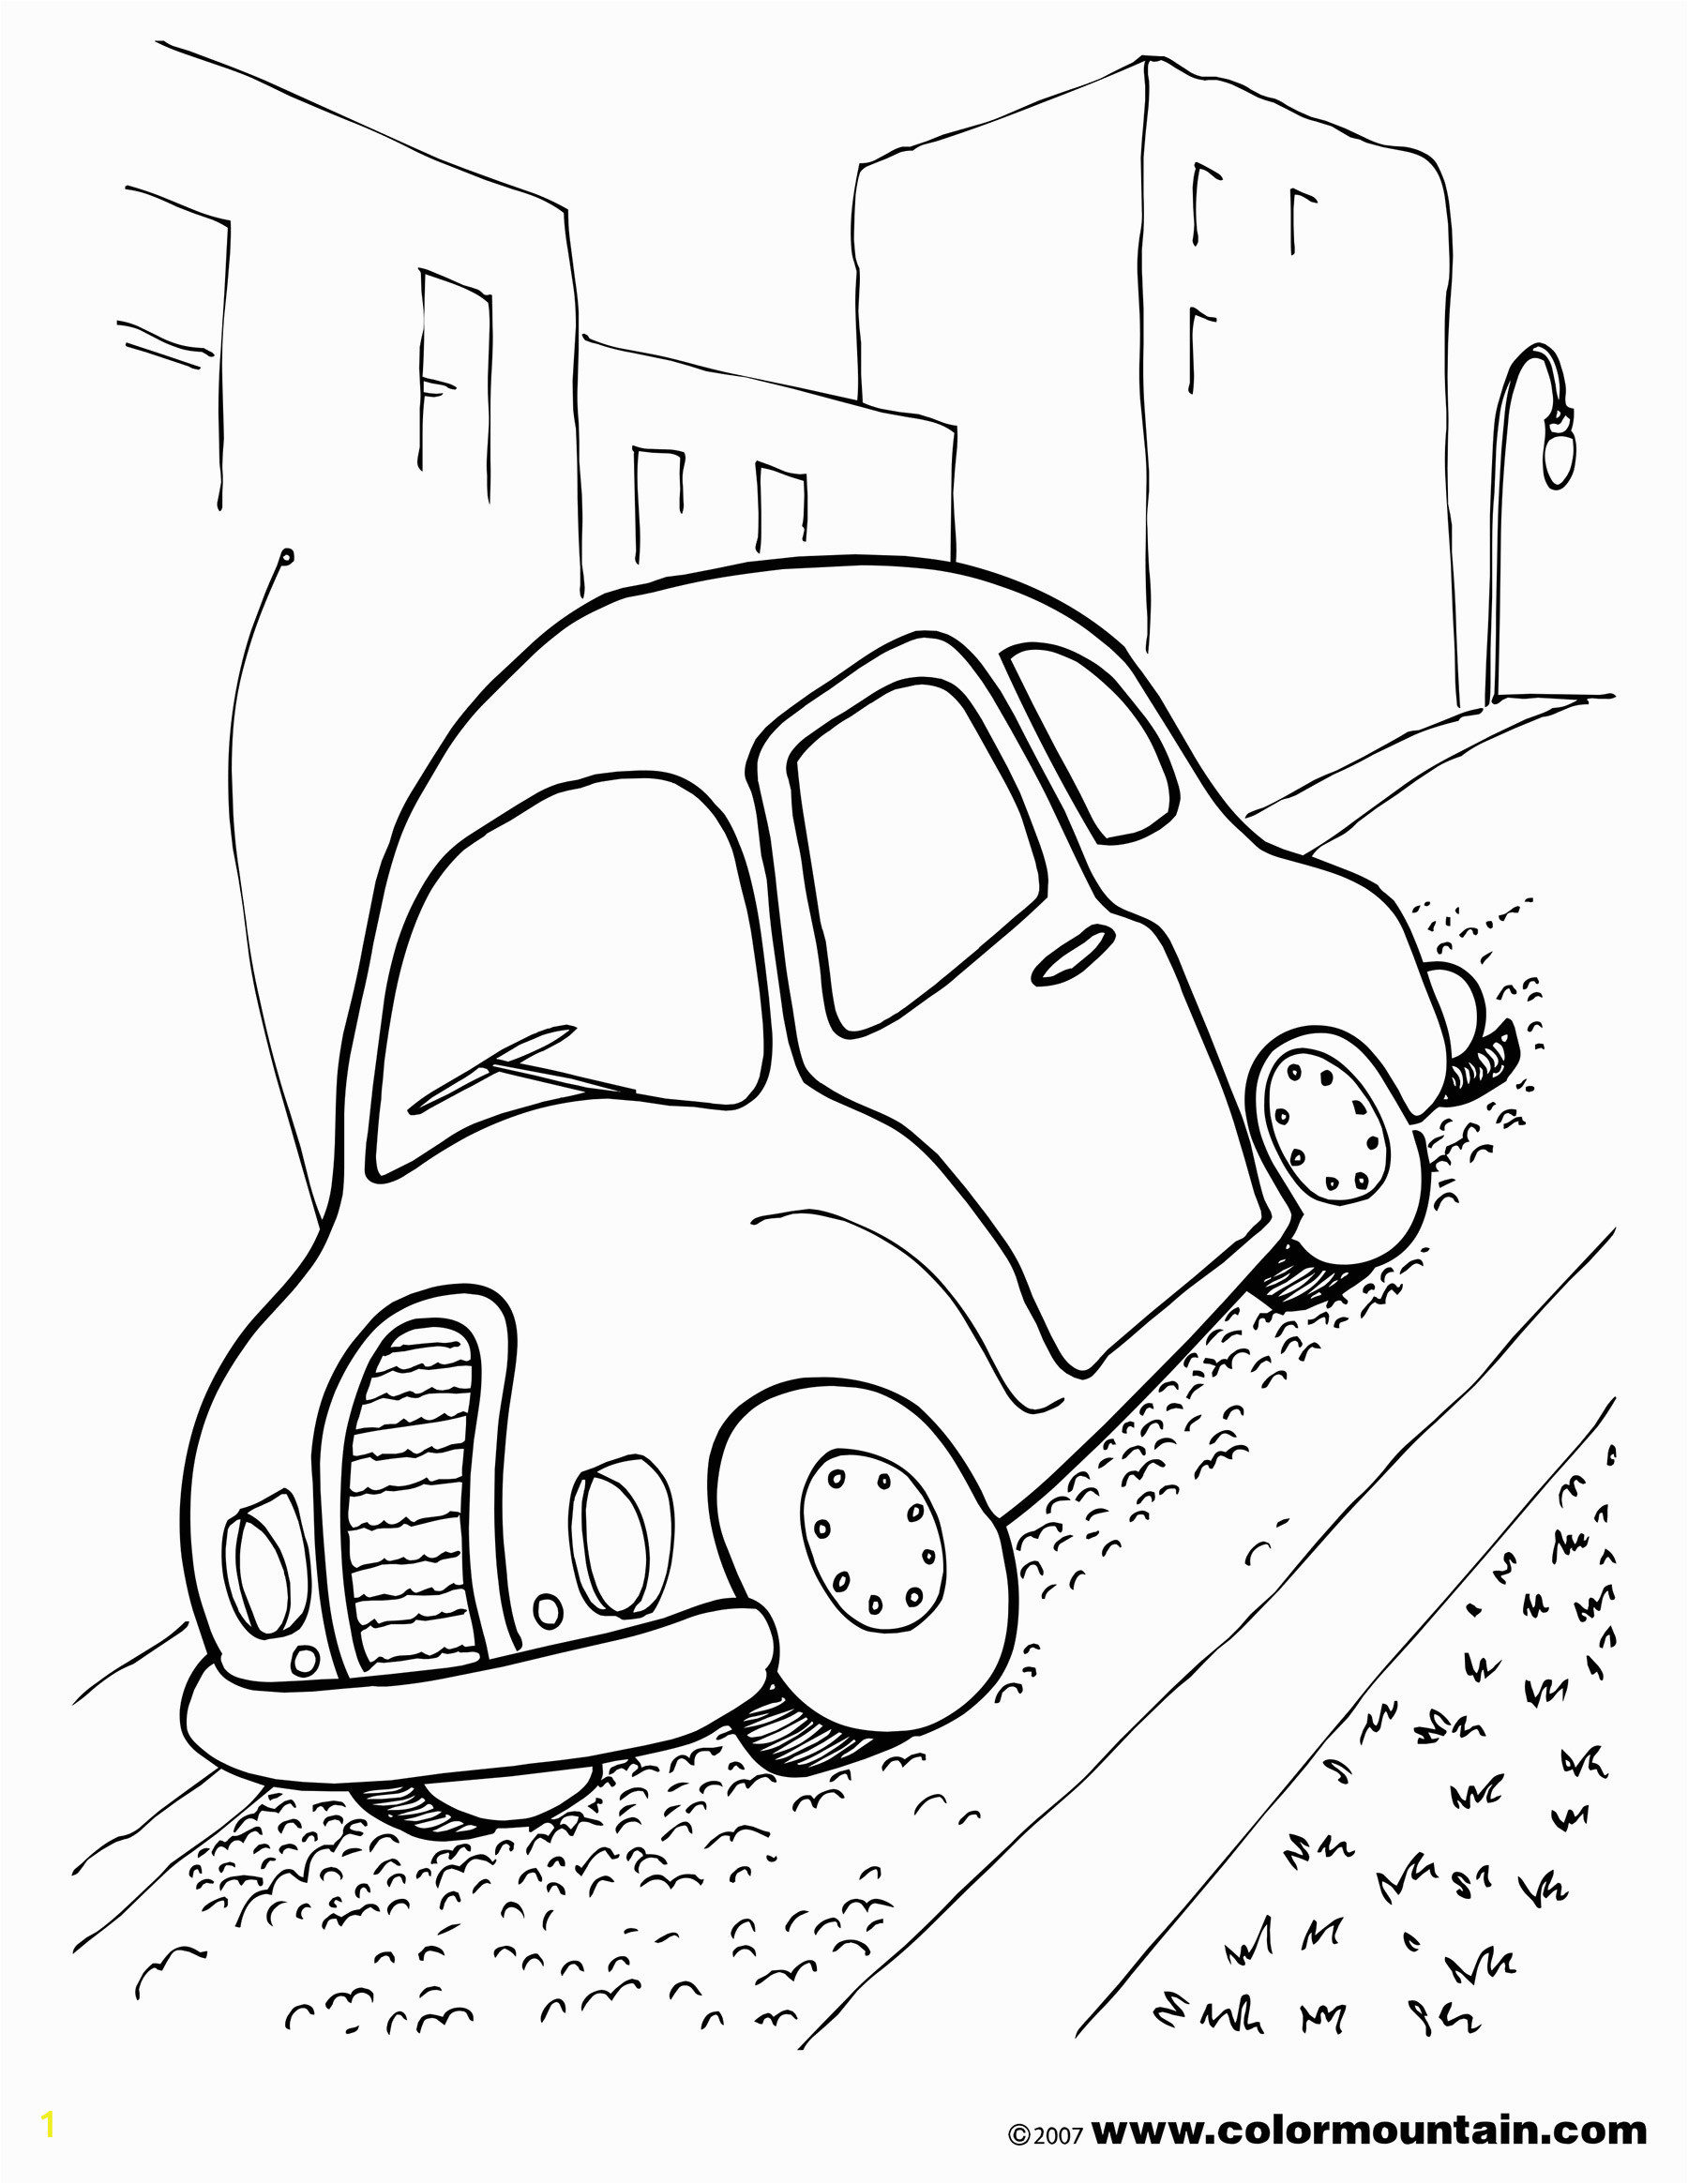 Herbie the Love Bug Coloring Pages Herbie the Love Bug Coloring Pages